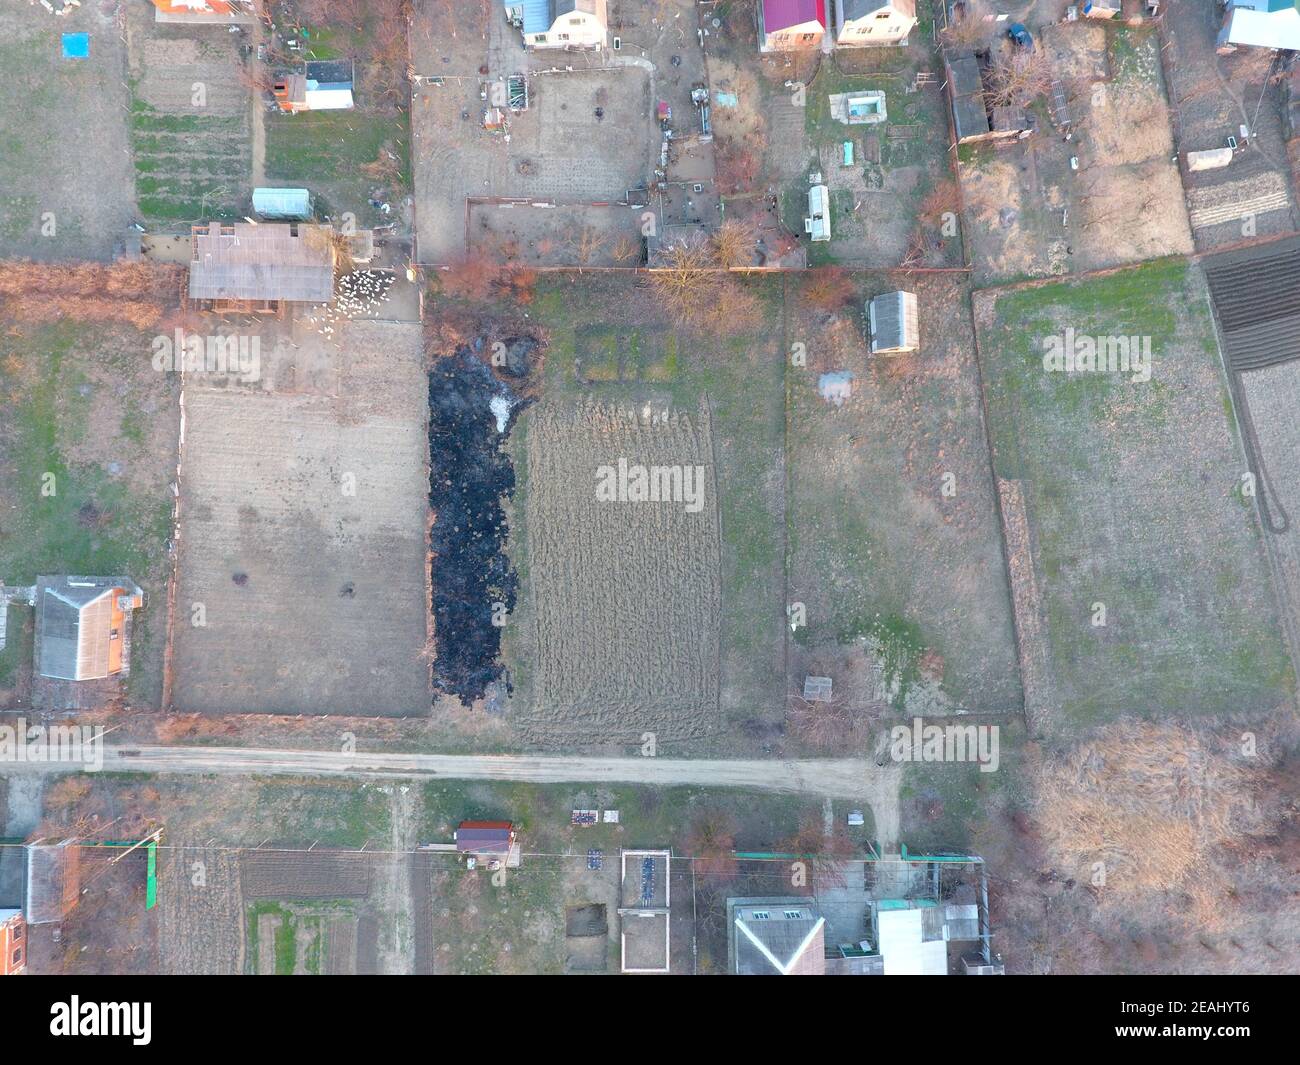 Plots of land for building. Compound and vegetable gardens. View from above. Stock Photo